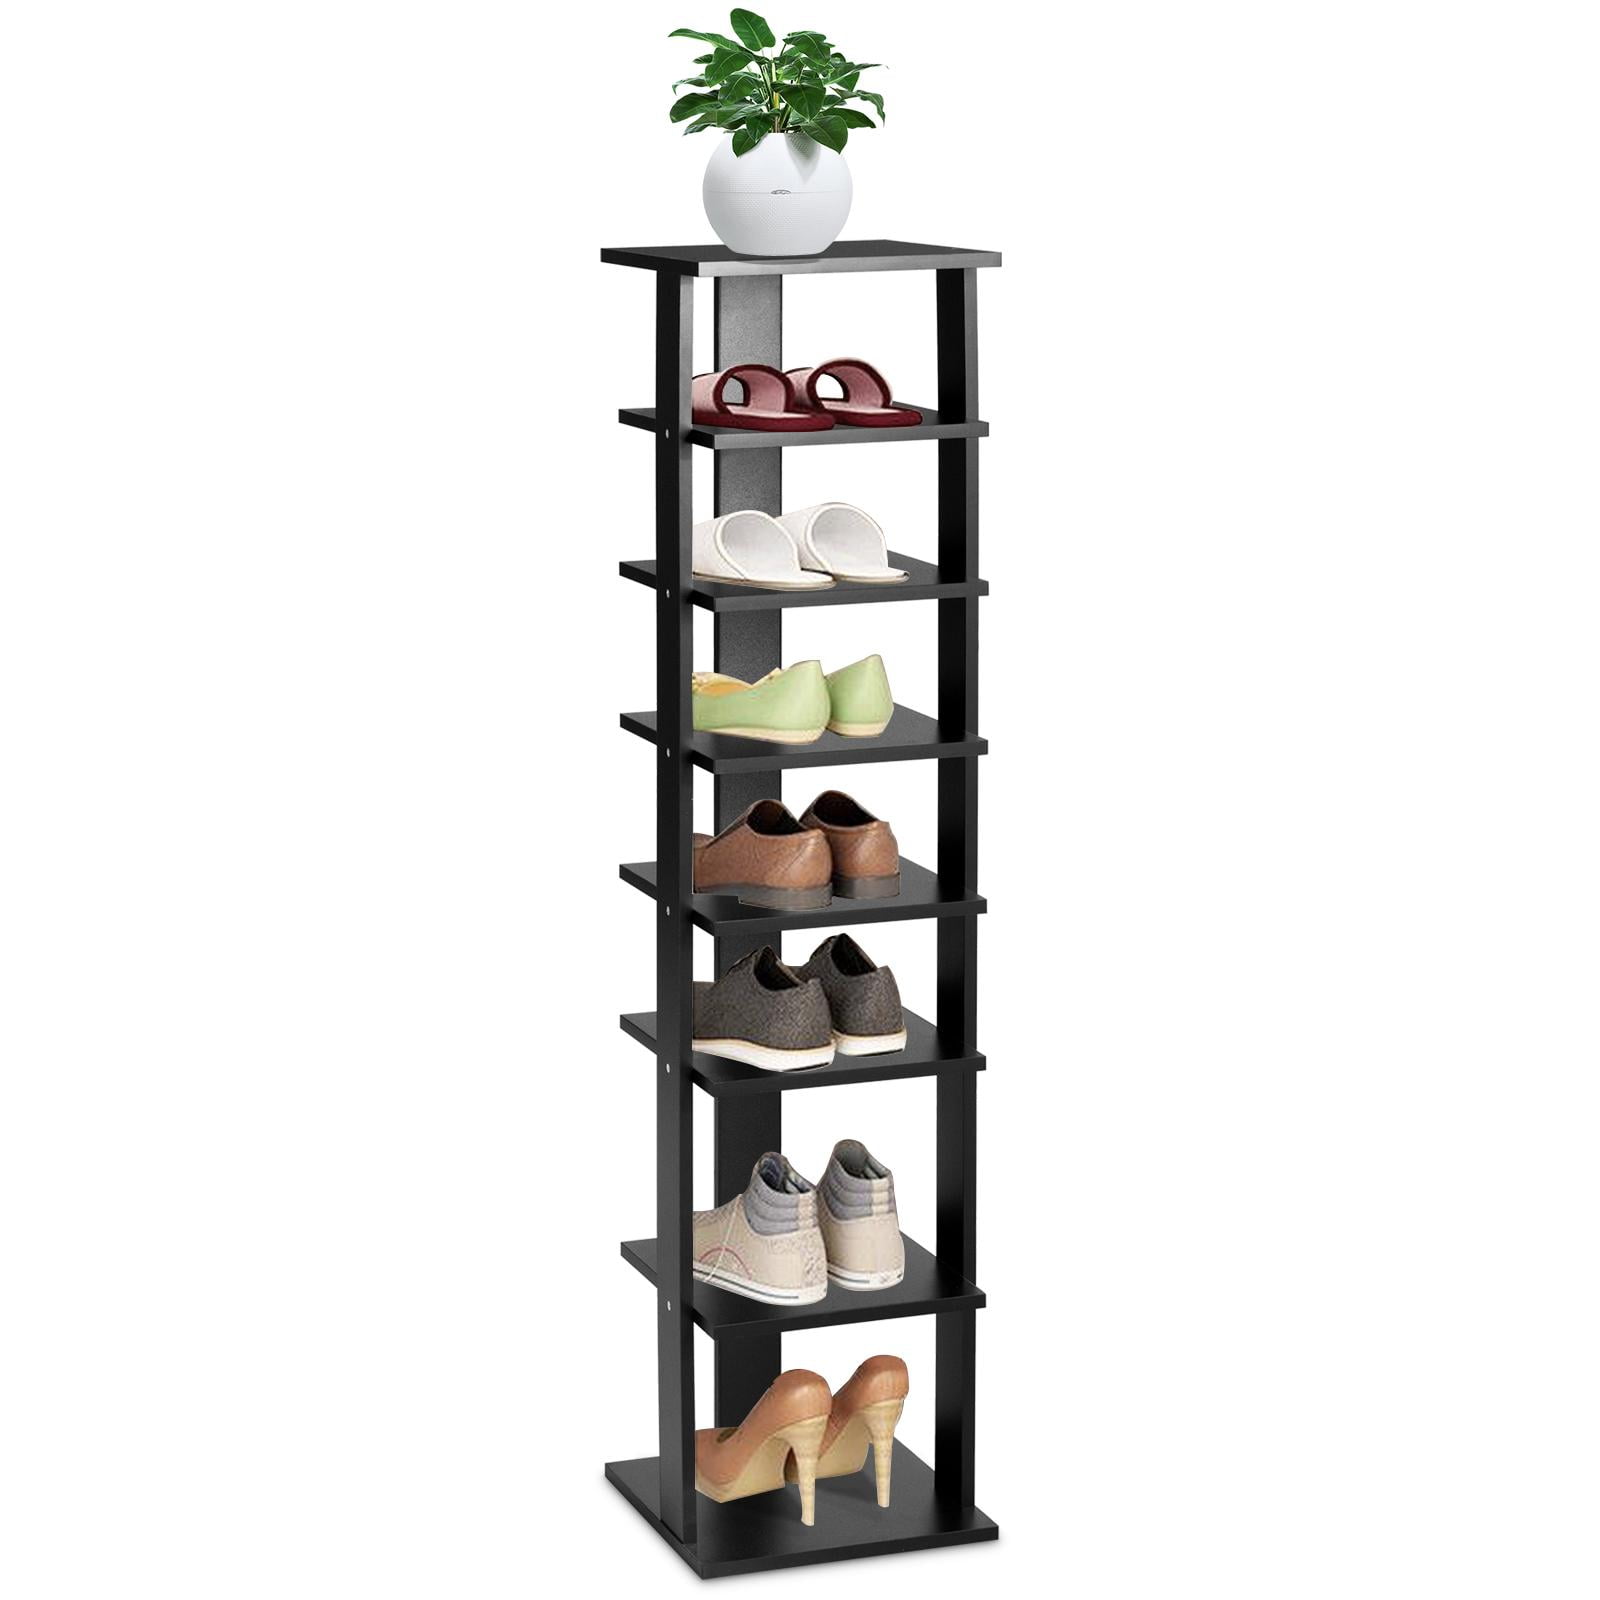 JEROAL Wooden Shoes Rack, 7 Tiers Entryway Vertical Narrow Tall Shoe Rack  for Small Spaces, Stylish Shoe Tower Storage Organizer for Front Door